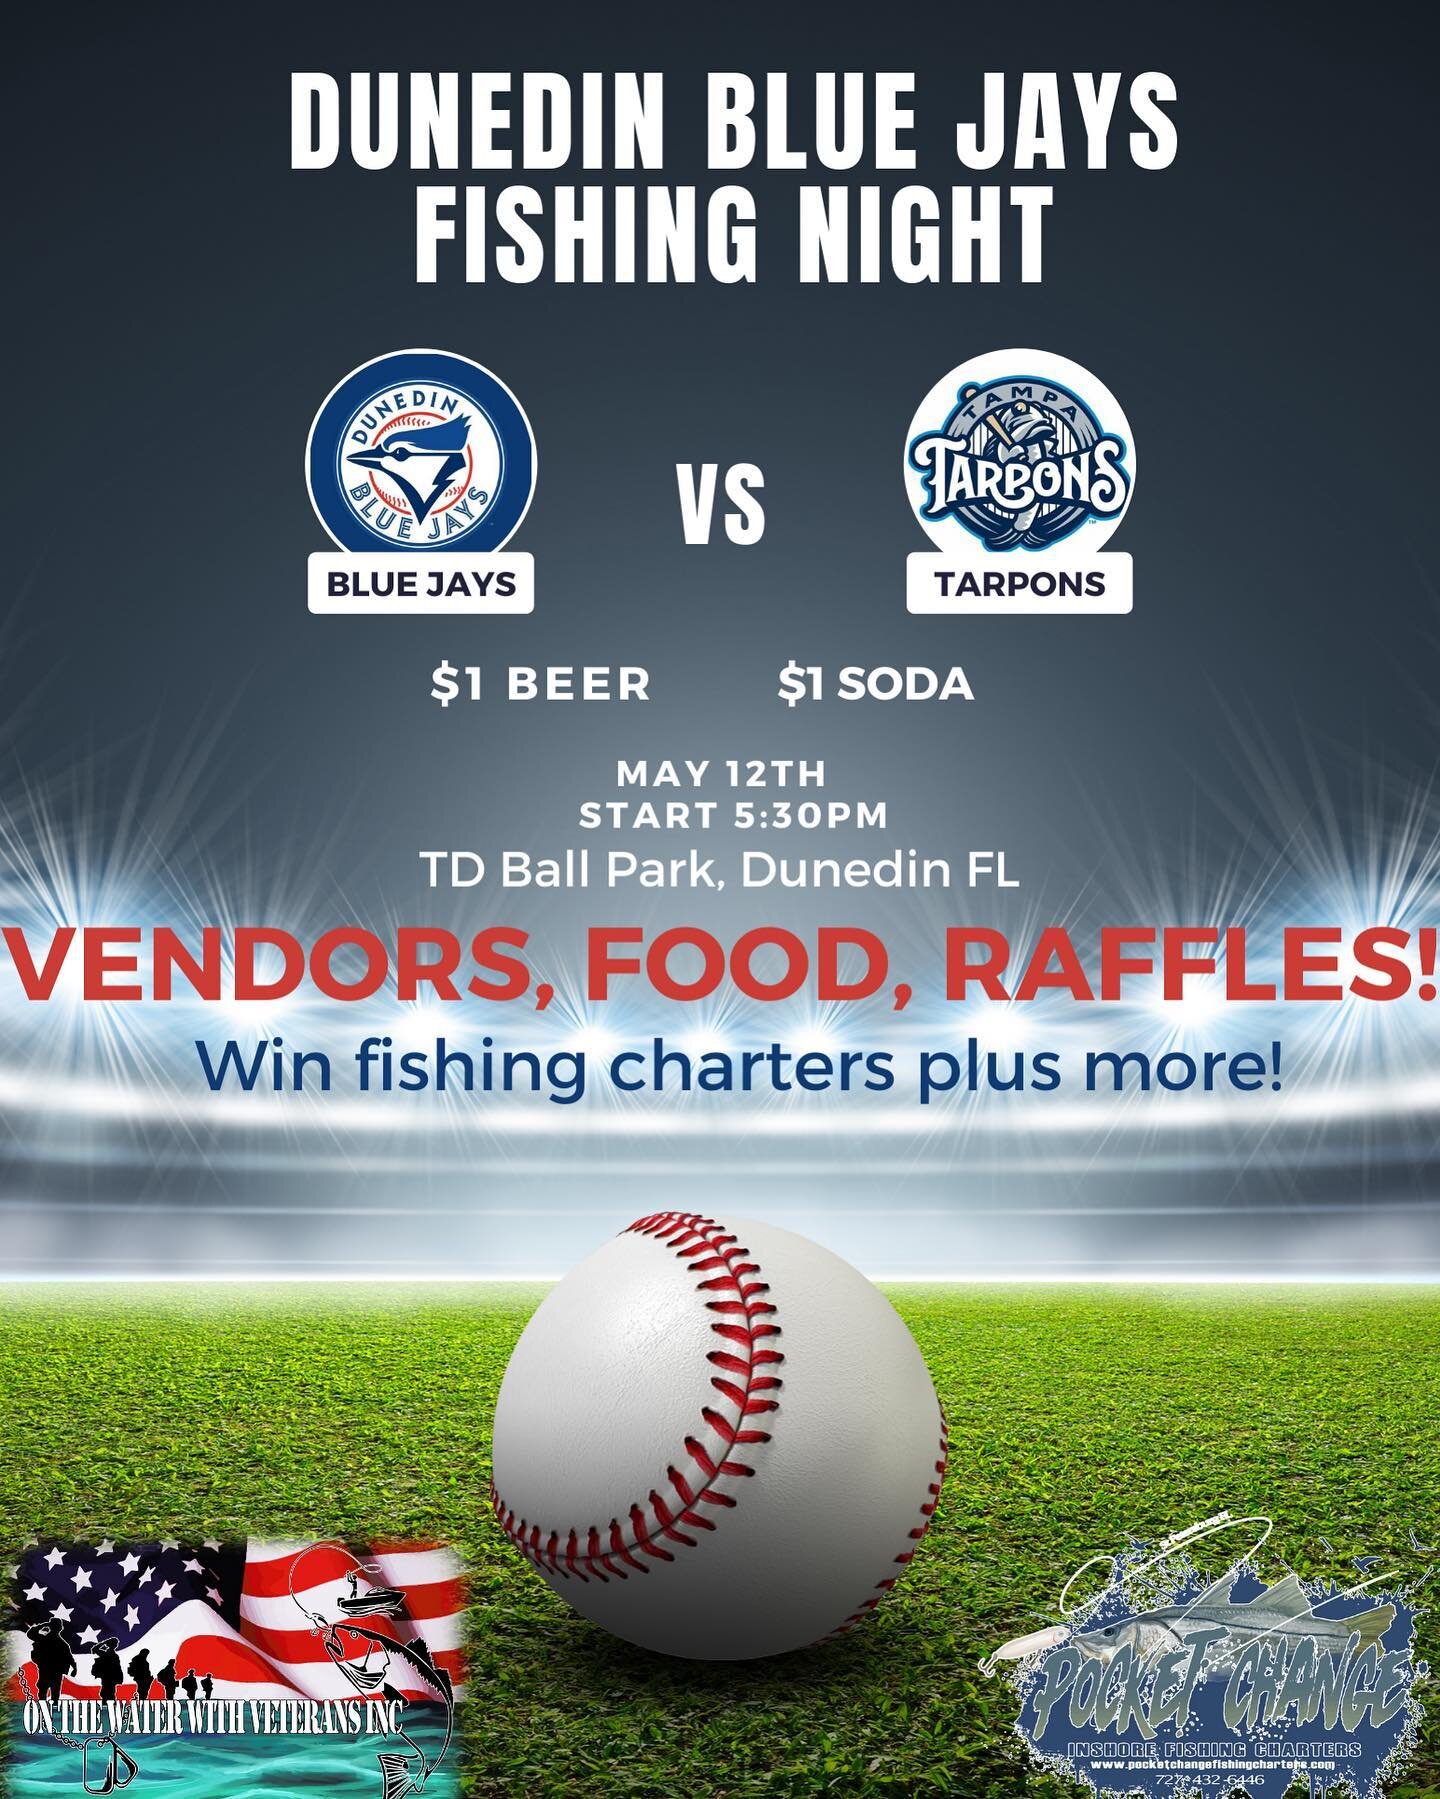 Come support both @pocketchangefishingcharters and @onthewaterwithveterans ! 
If you want tickets let me know!
Lots of fishing related vendors! Lots of raffles! 
Plus Pocket Change will be raffling off a charter as well!